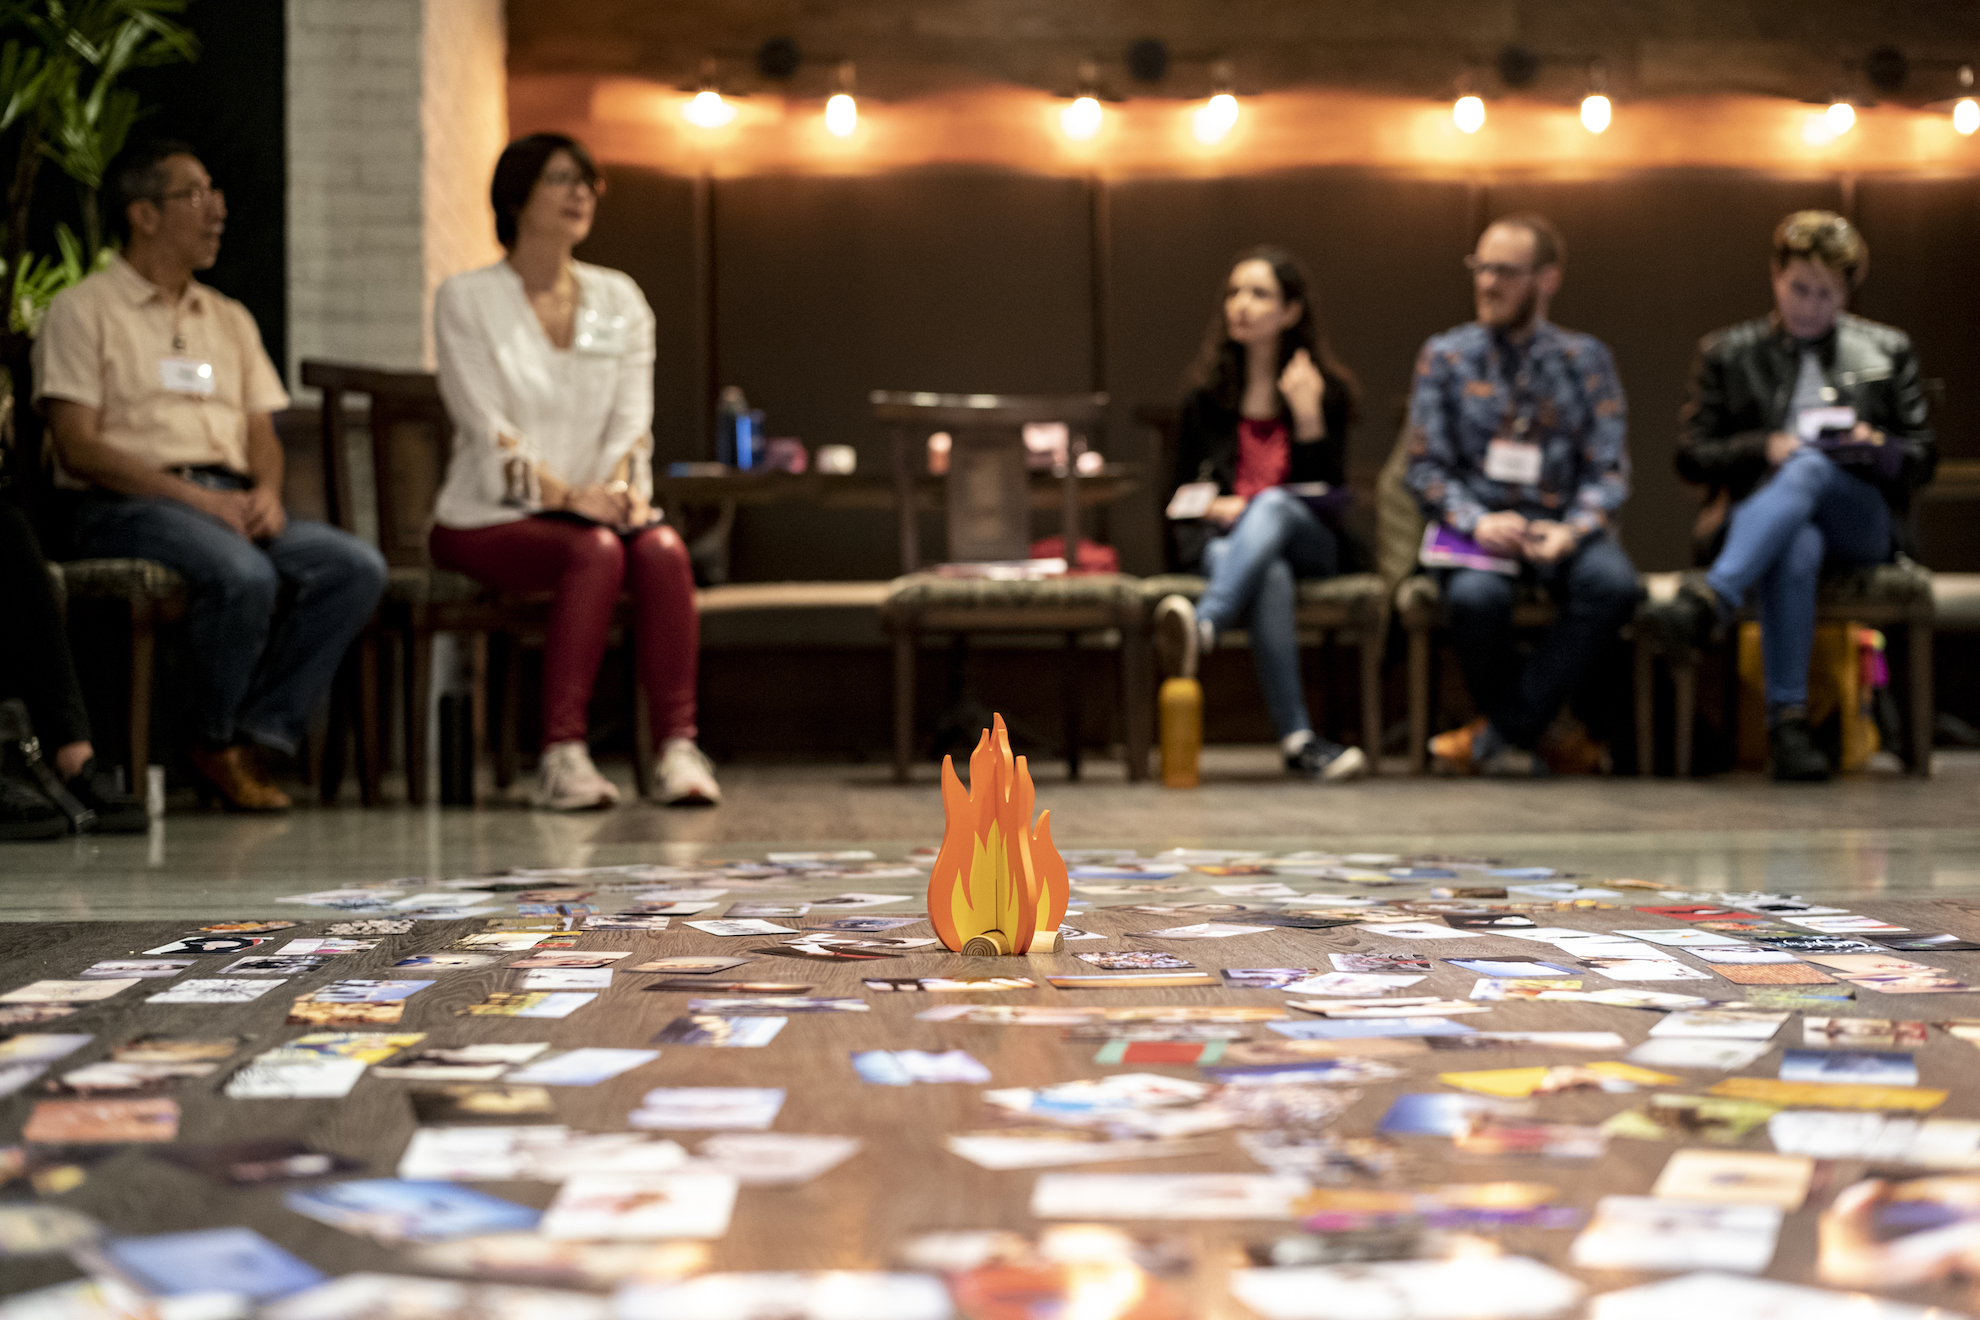 People are seated in a circle around dozens of cards scattered around the floor surrounding a fire